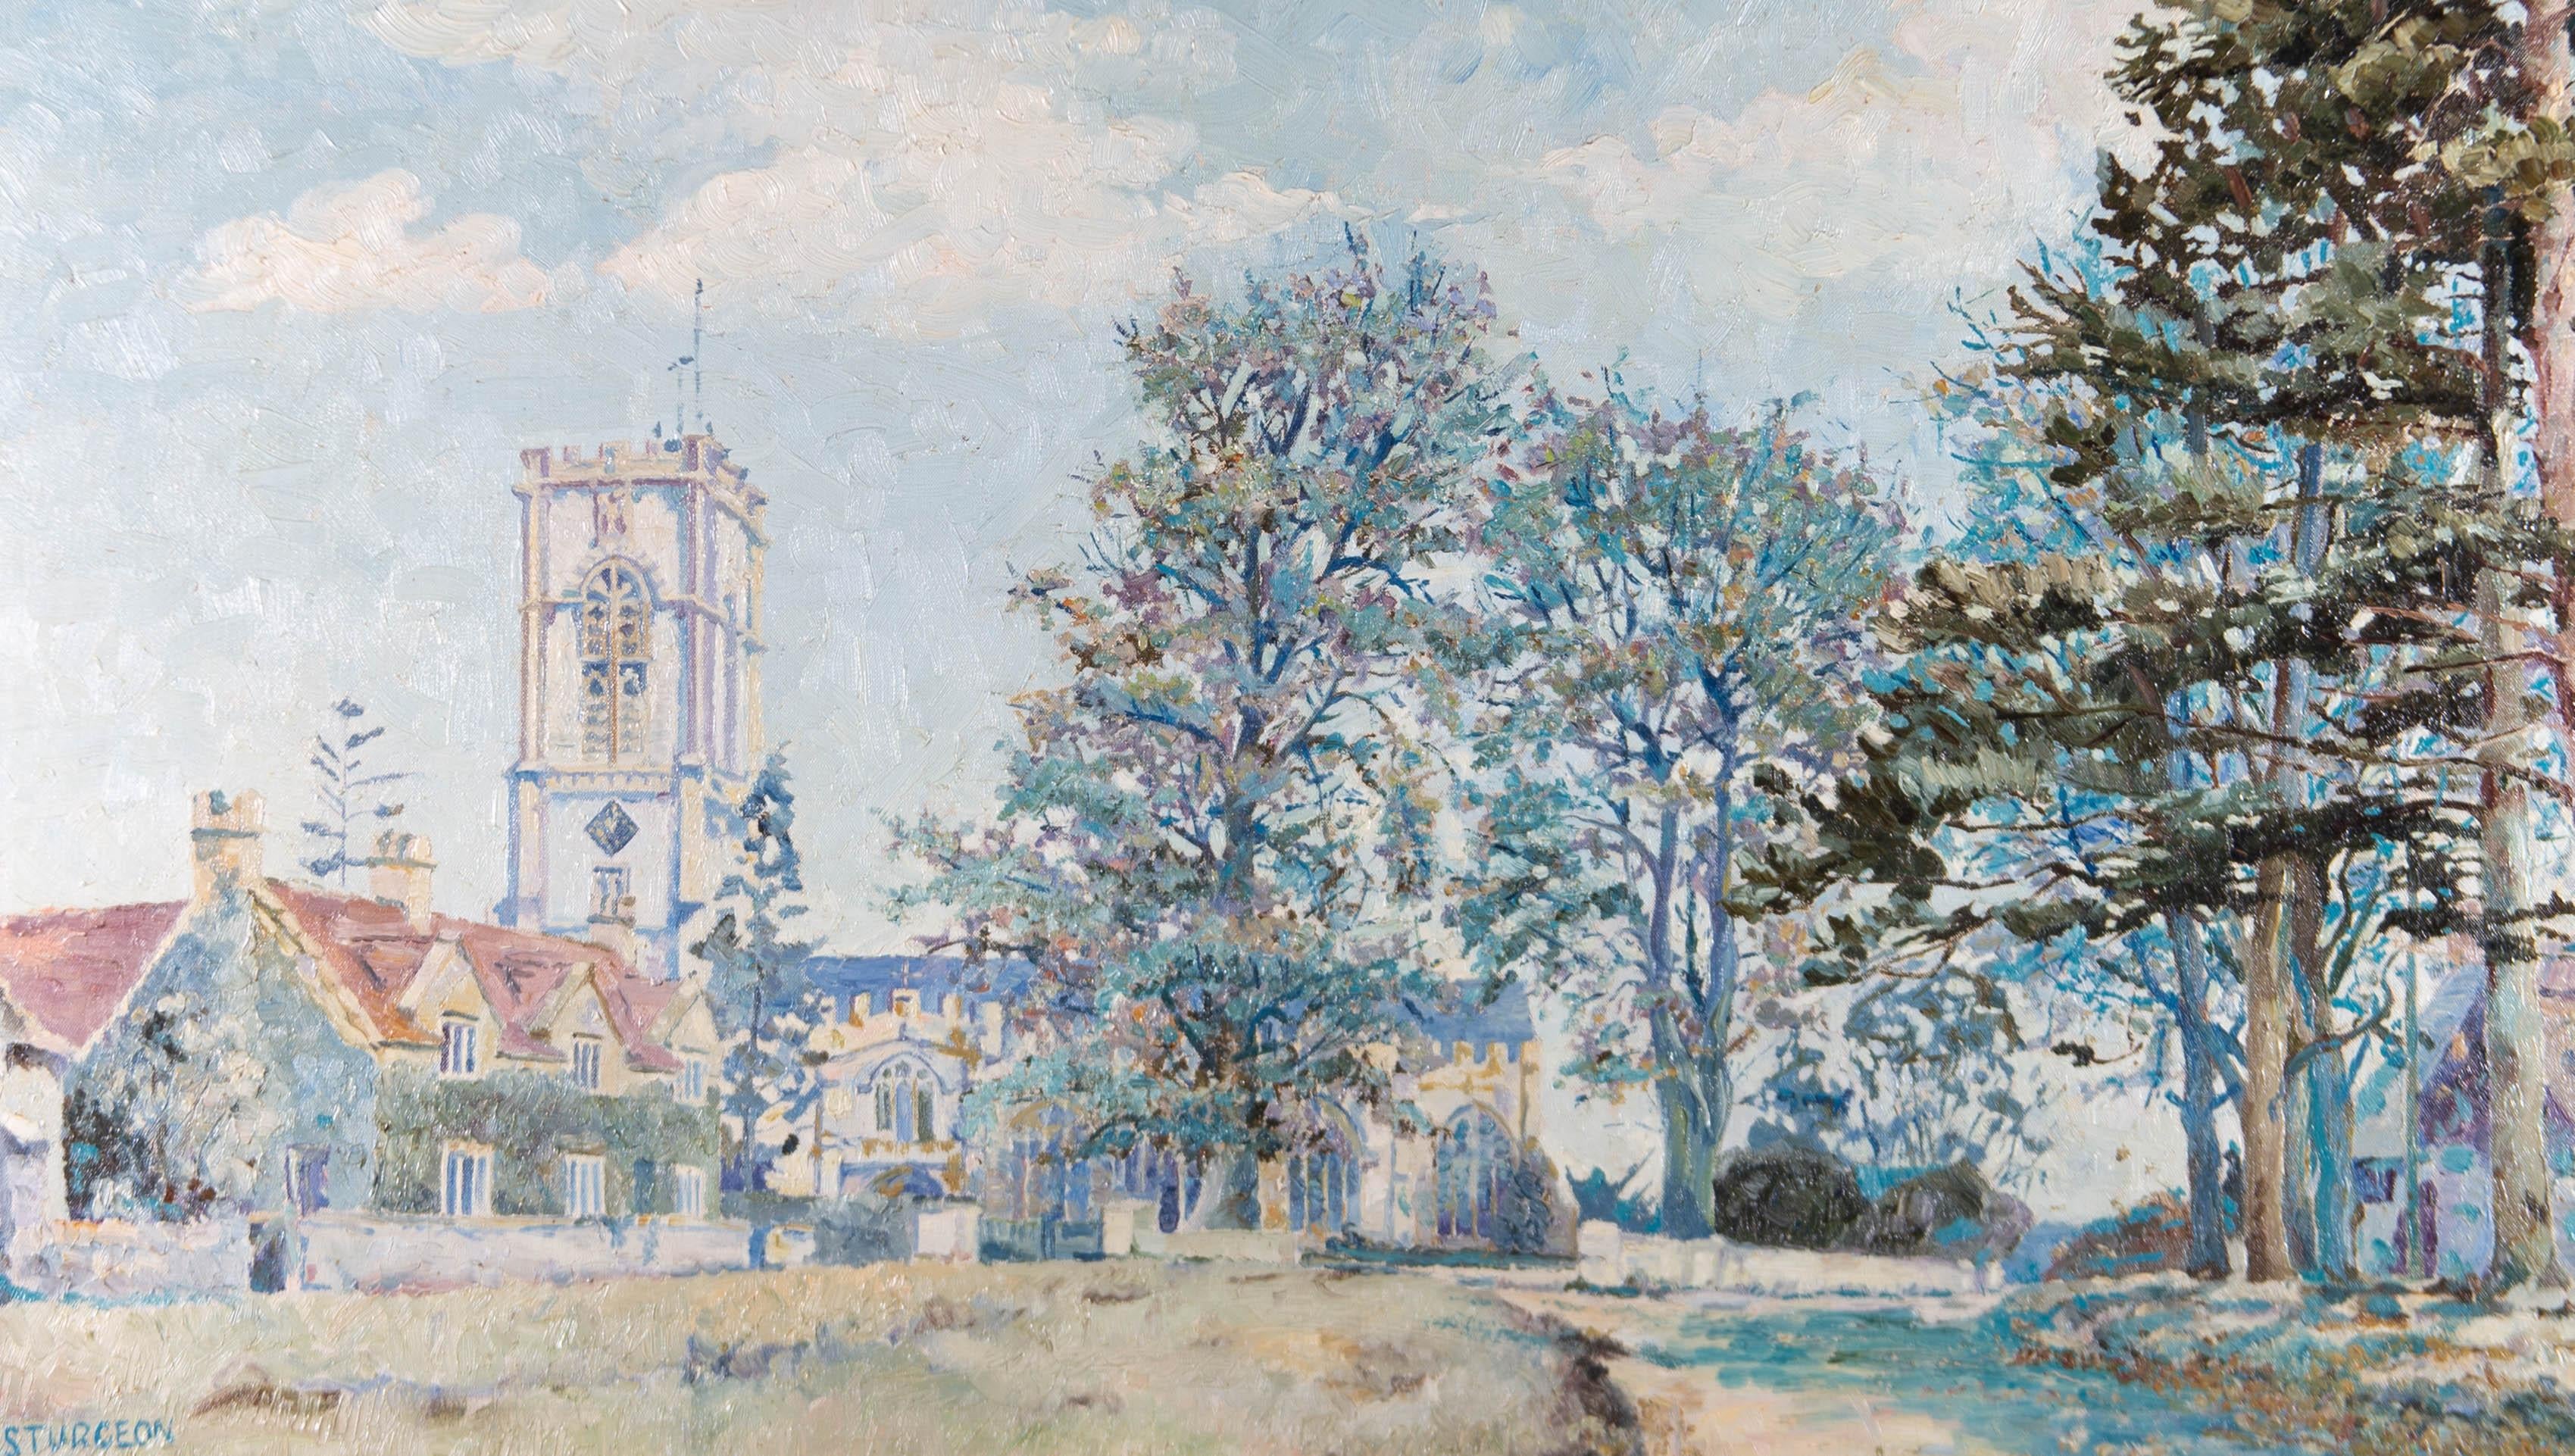 E. R. Sturgeon (1920-1999) - Mid 20th Century Oil, Impressionistic Church - Painting by Unknown